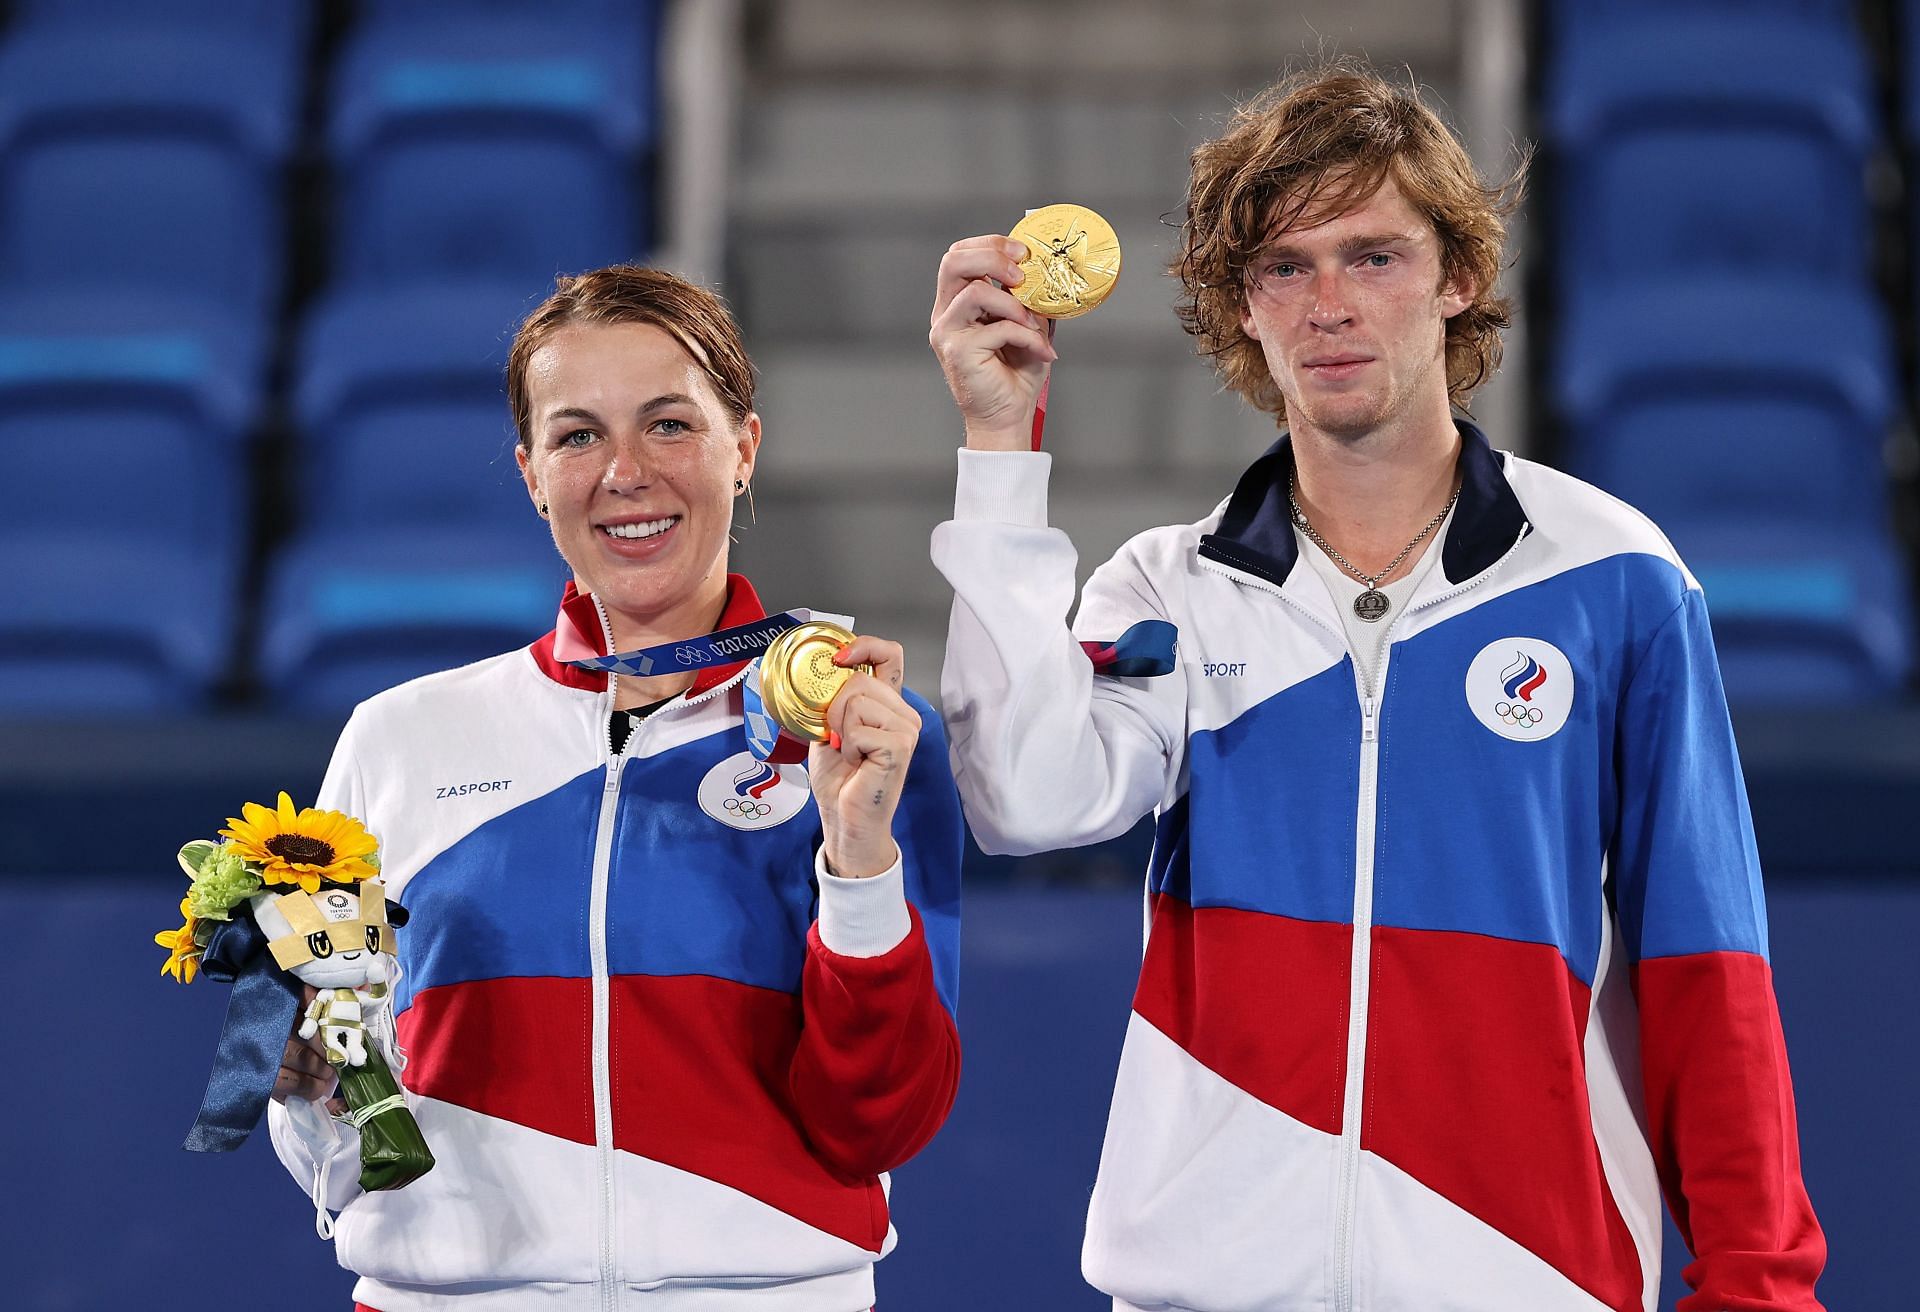 Anastaia Pavlyuchenkova and Andrey Rublev celebrate winning gold medals in mixed doubles at the 2020 Tokyo Olympics